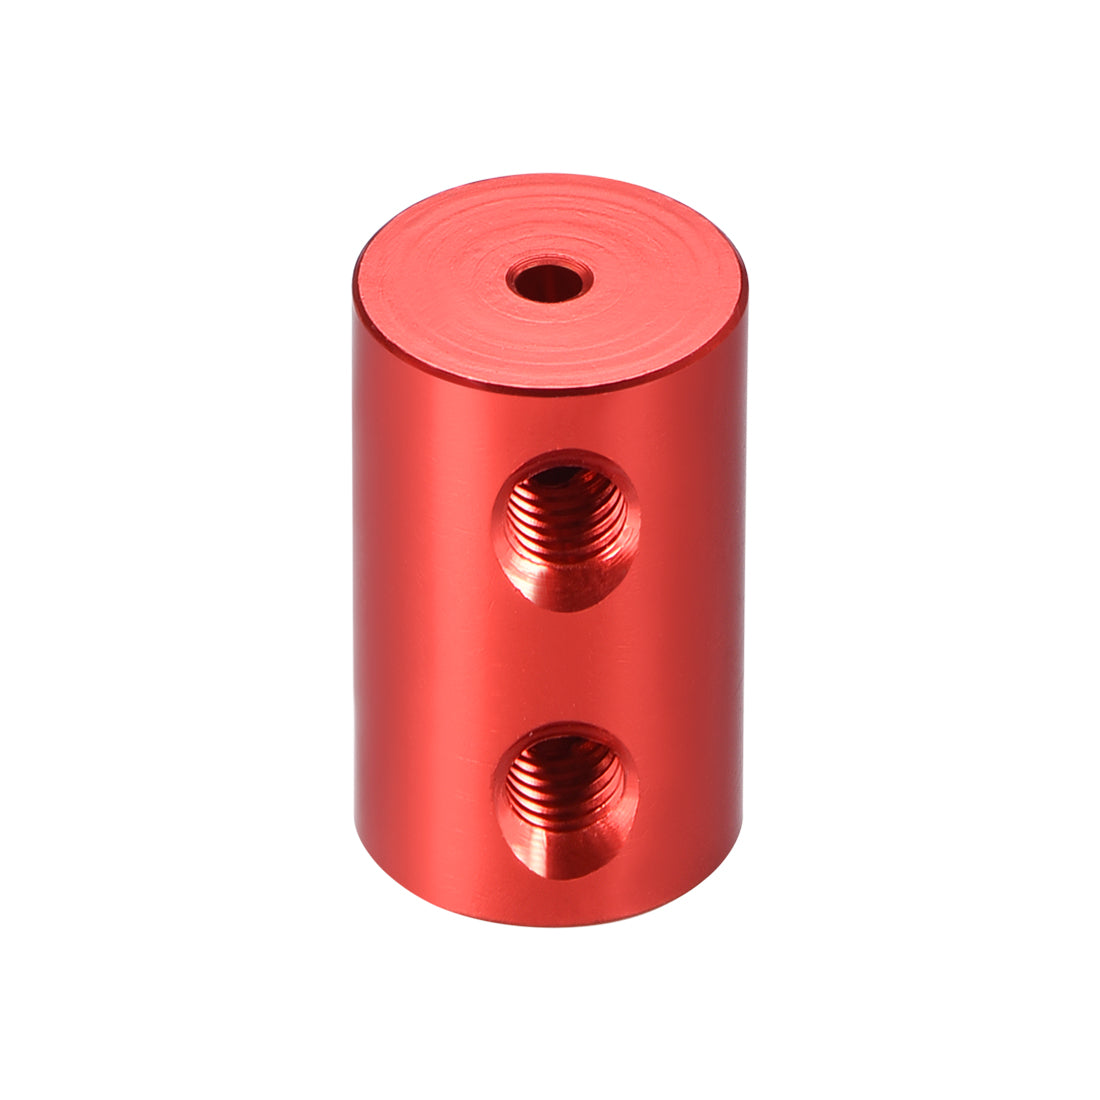 uxcell Uxcell Shaft Coupling 2mm to 5mm Bore L20xD12 Robot Motor Wheel Rigid Coupler Connector Red